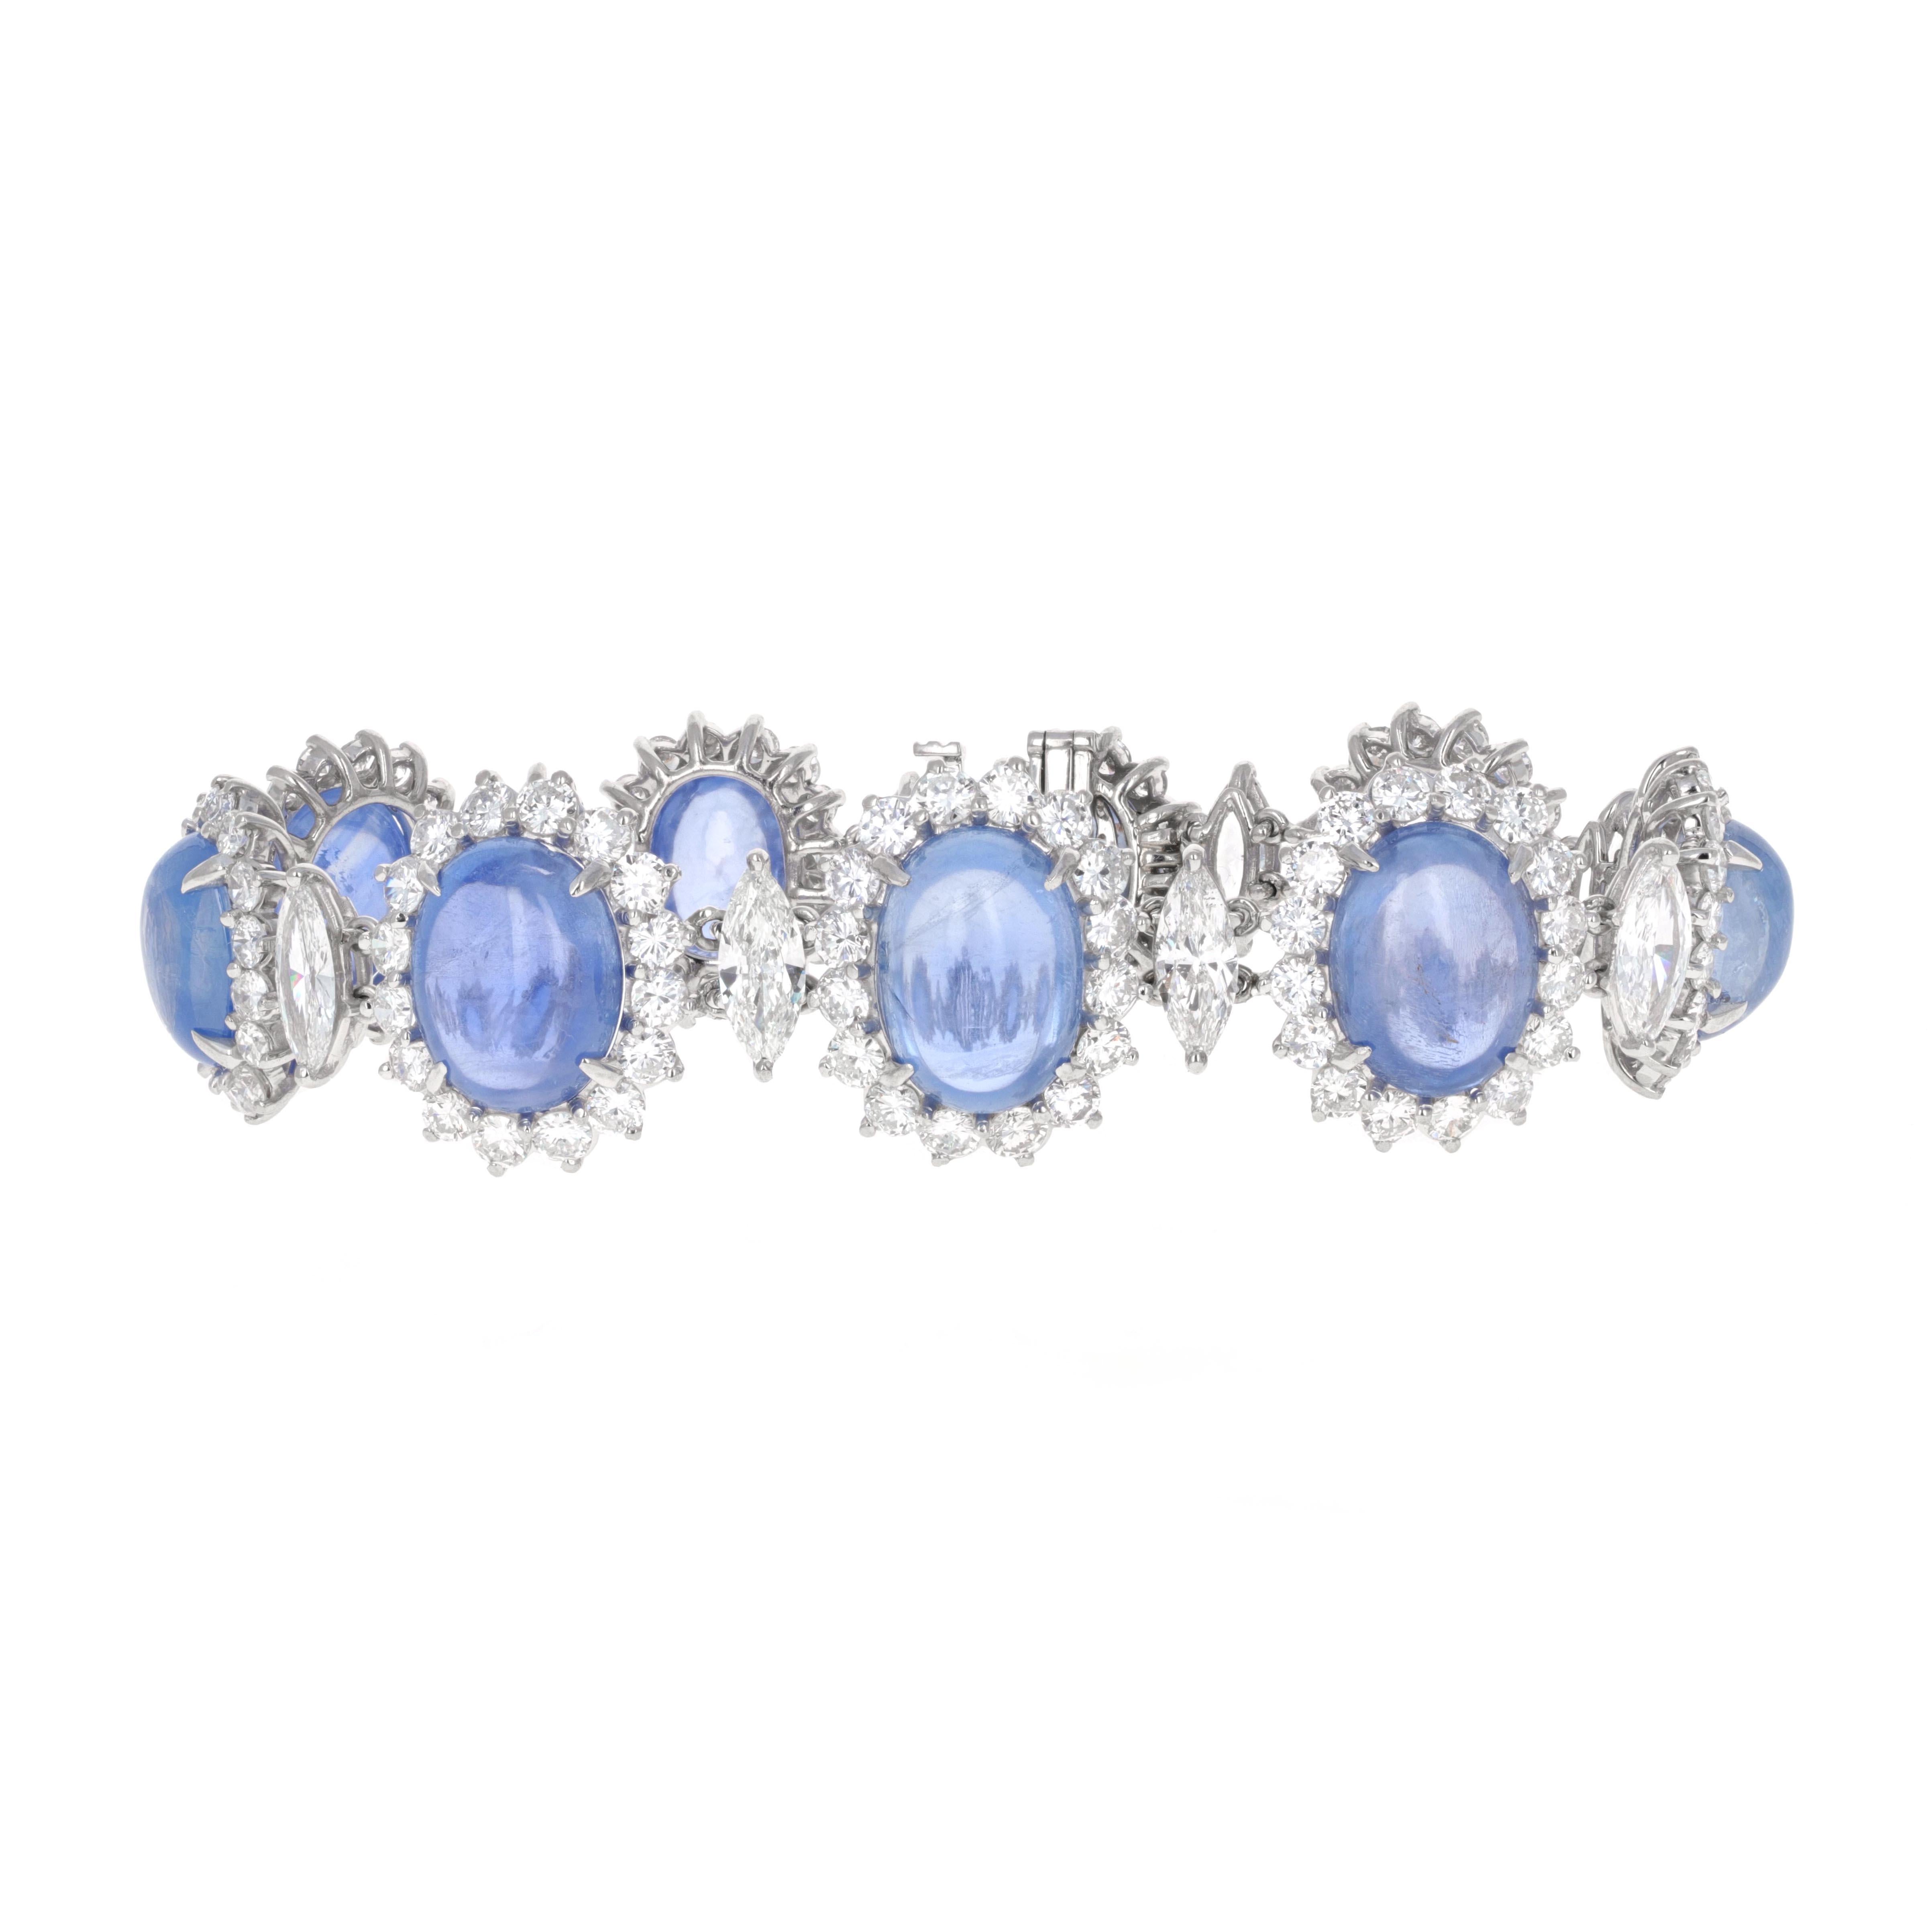 18 karat white gold blue sapphire cabochon and diamond bracelet. This is an estate piece in mint condition. There are 9 sapphires weighing an estimated 62.00 carats total weight. Each cabochon sapphire is surrounded by white, eye clean round